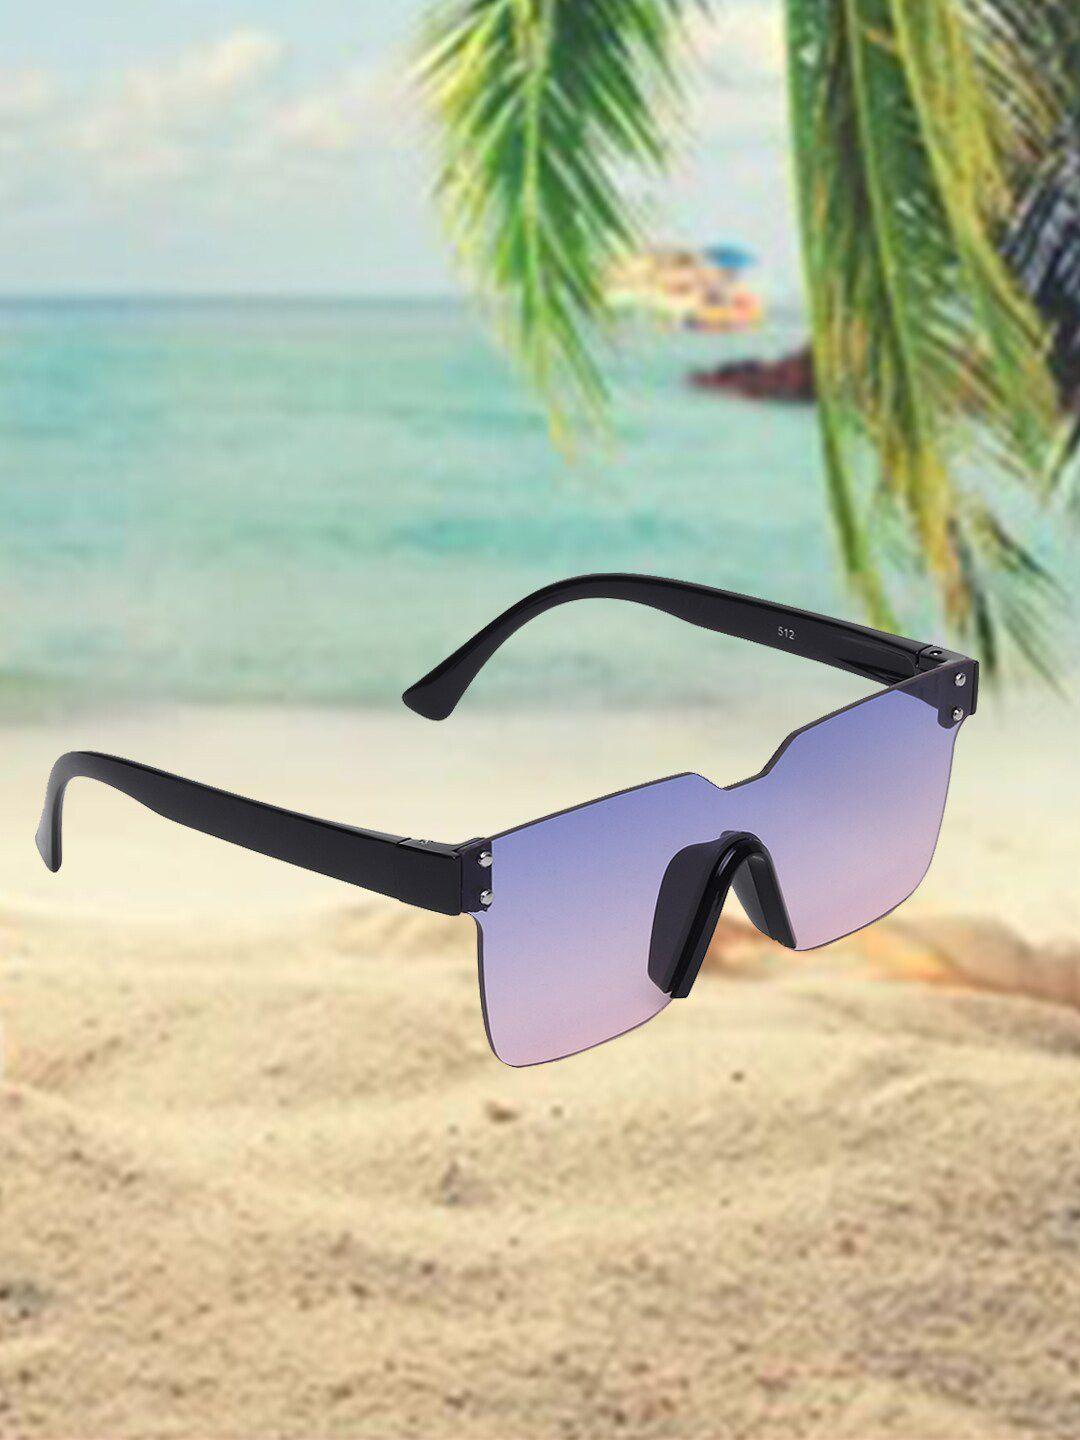 celebrity sunglasses rectangle sunglasses with uv protected lens